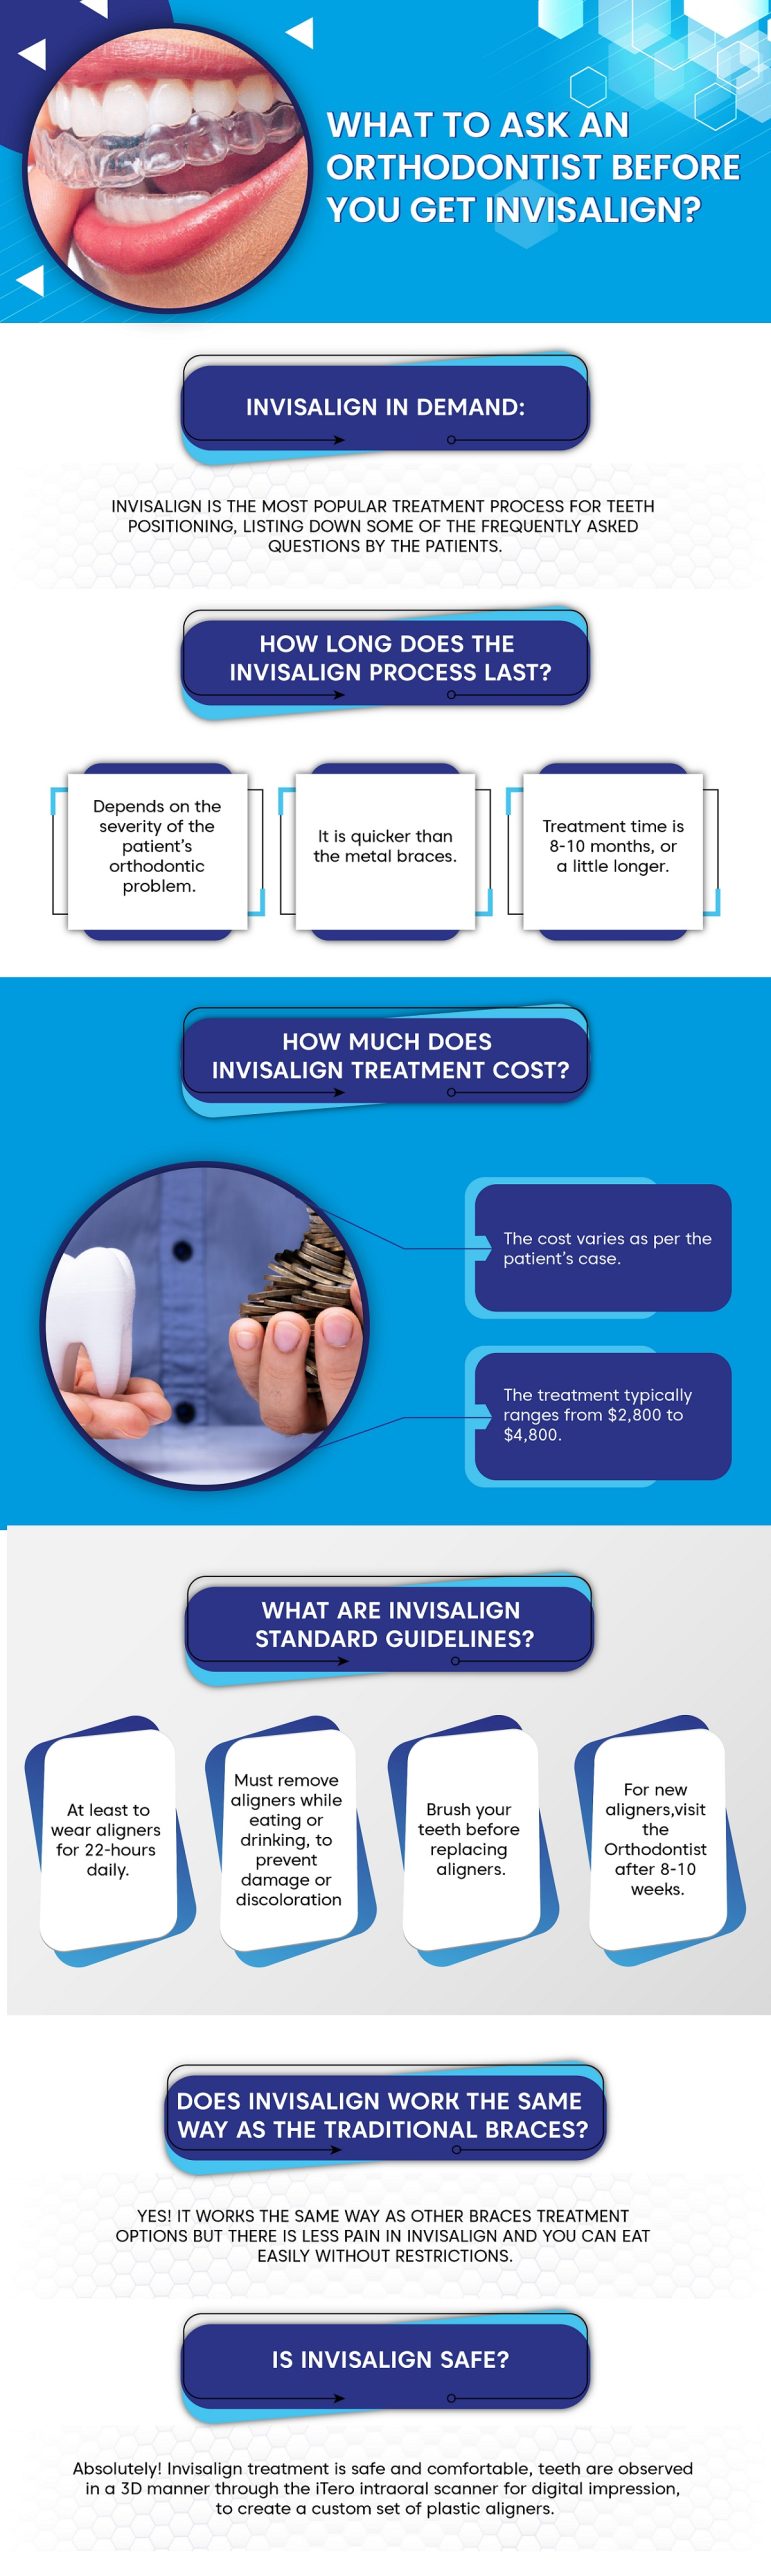 important things to know about Invisalign